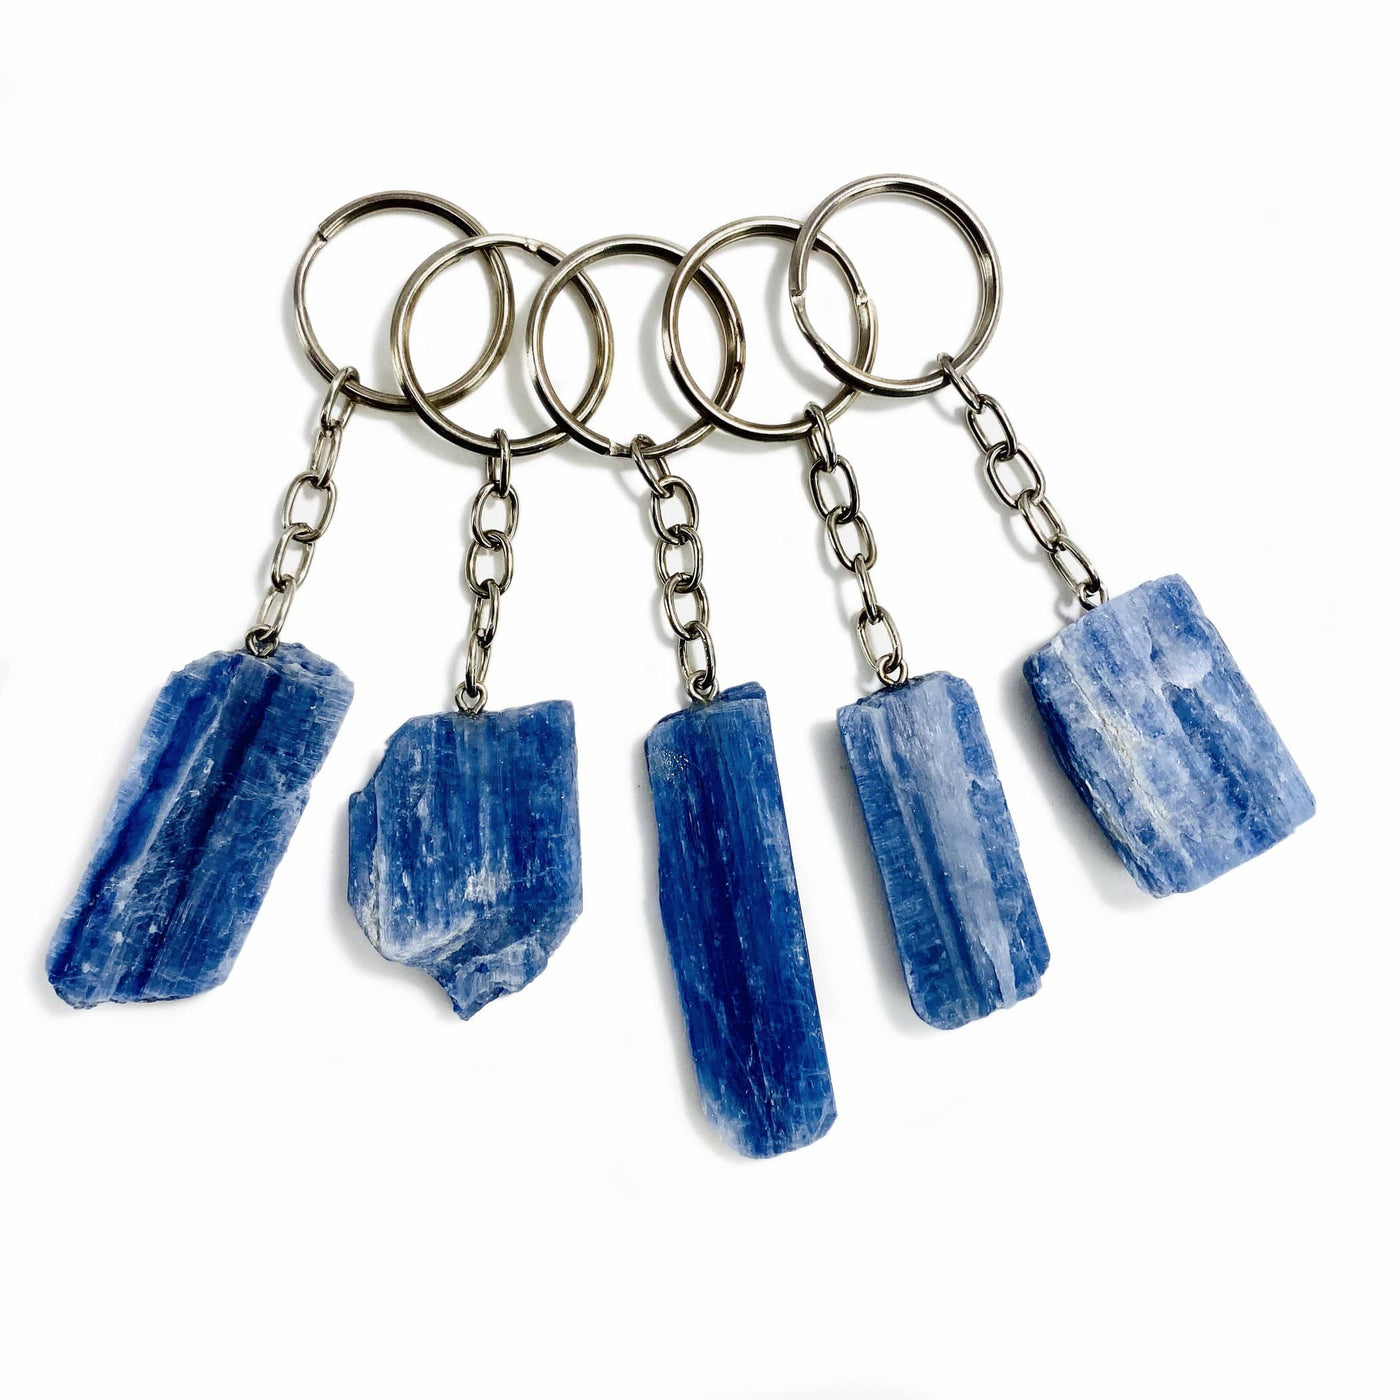 multiple Blue Kyanite Silver Toned Key Chain displayed to show various shapes sizes and color